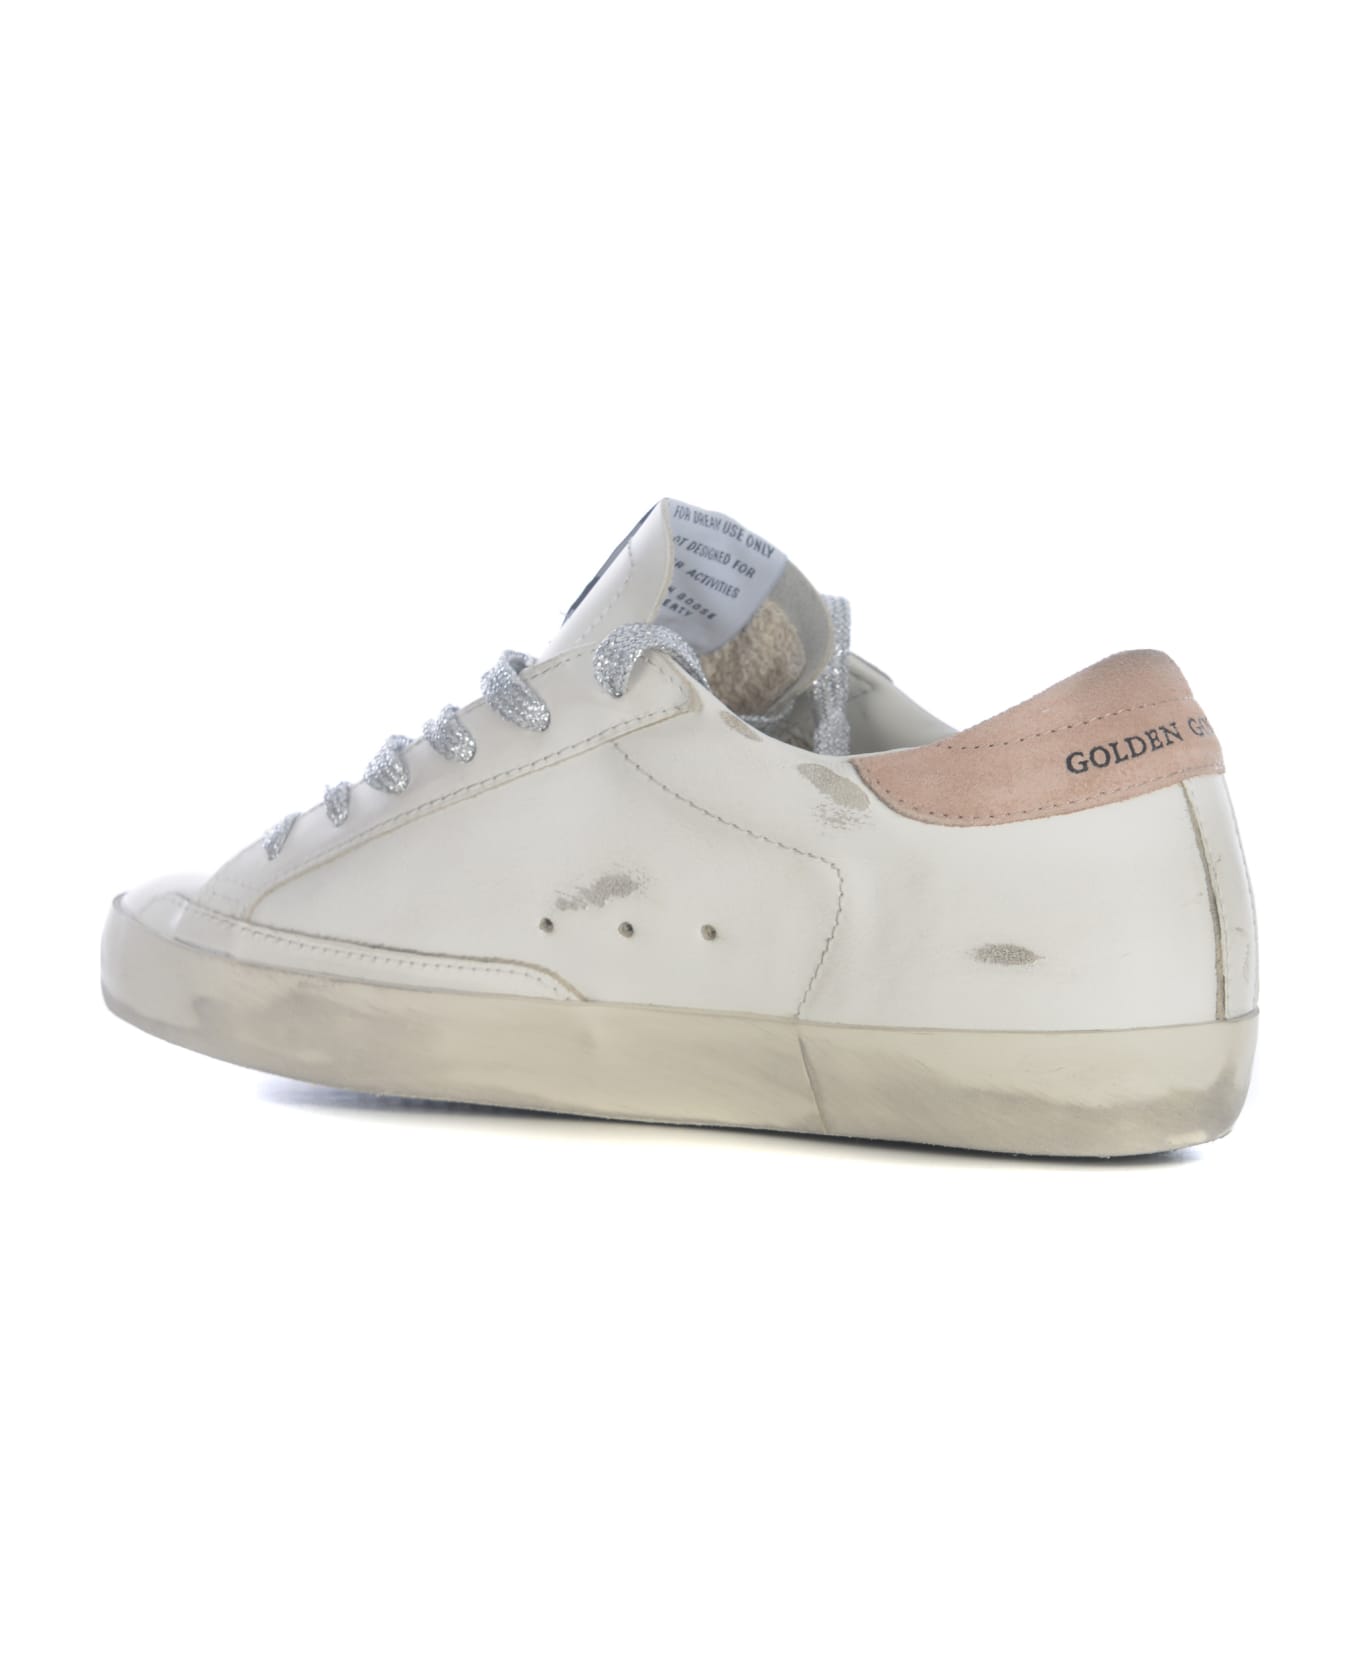 Golden Goose Sneakers Golden Goose "super Star" Made Of Leather - Bianco/rosa